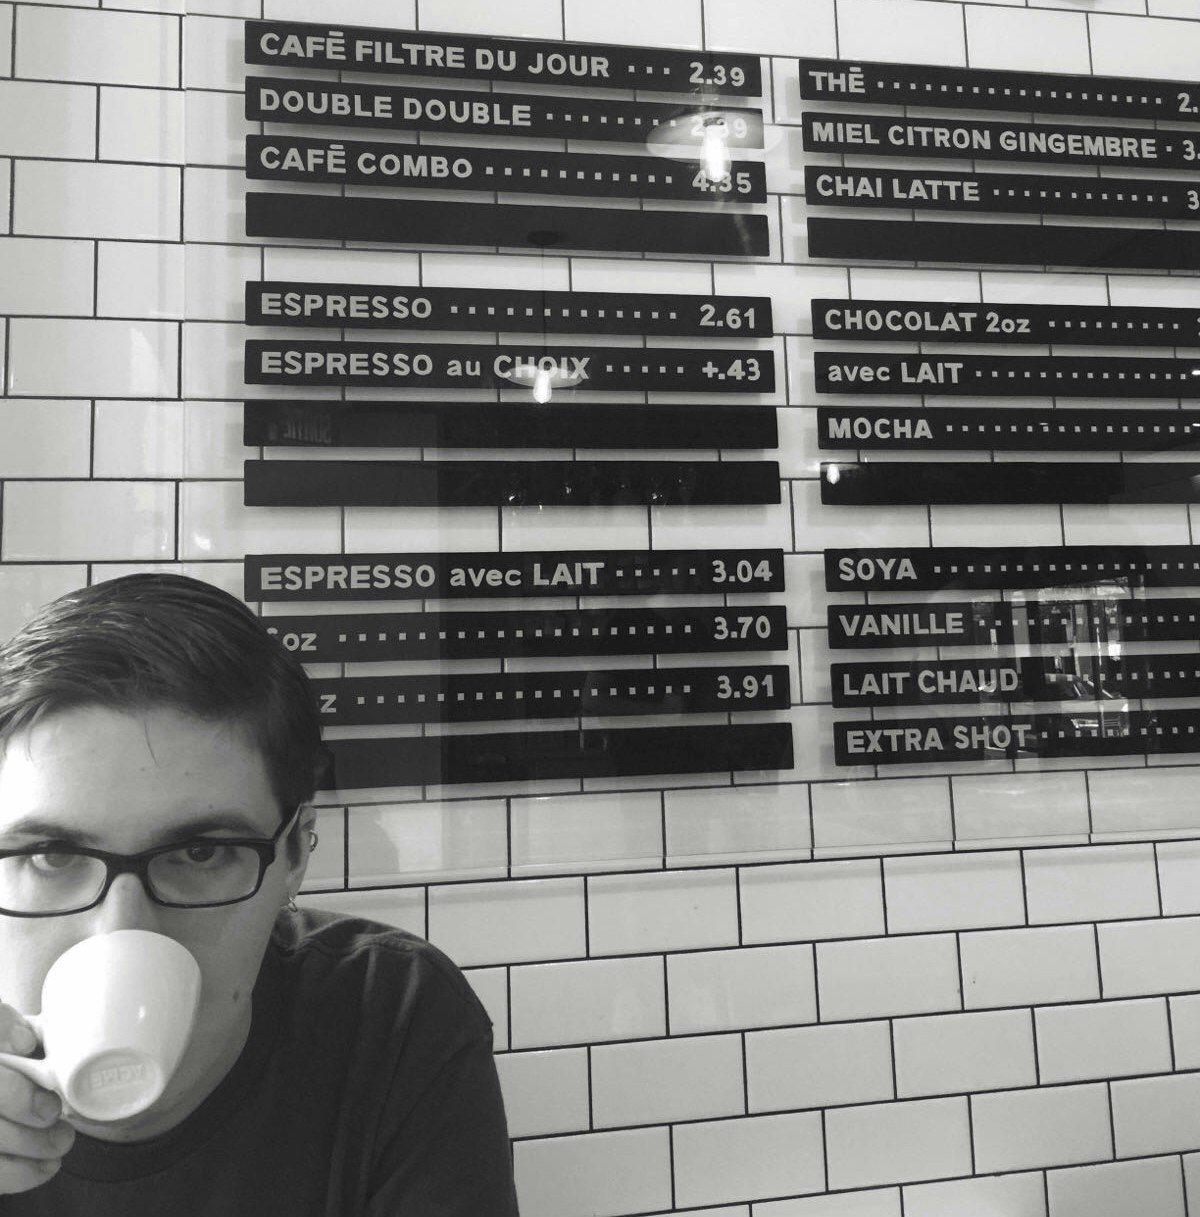 Article writer Fionn Pooler sits under a coffee shop price list mounted on a white tiled wall. He's looks directly at the camera as he takes a sip of coffee.